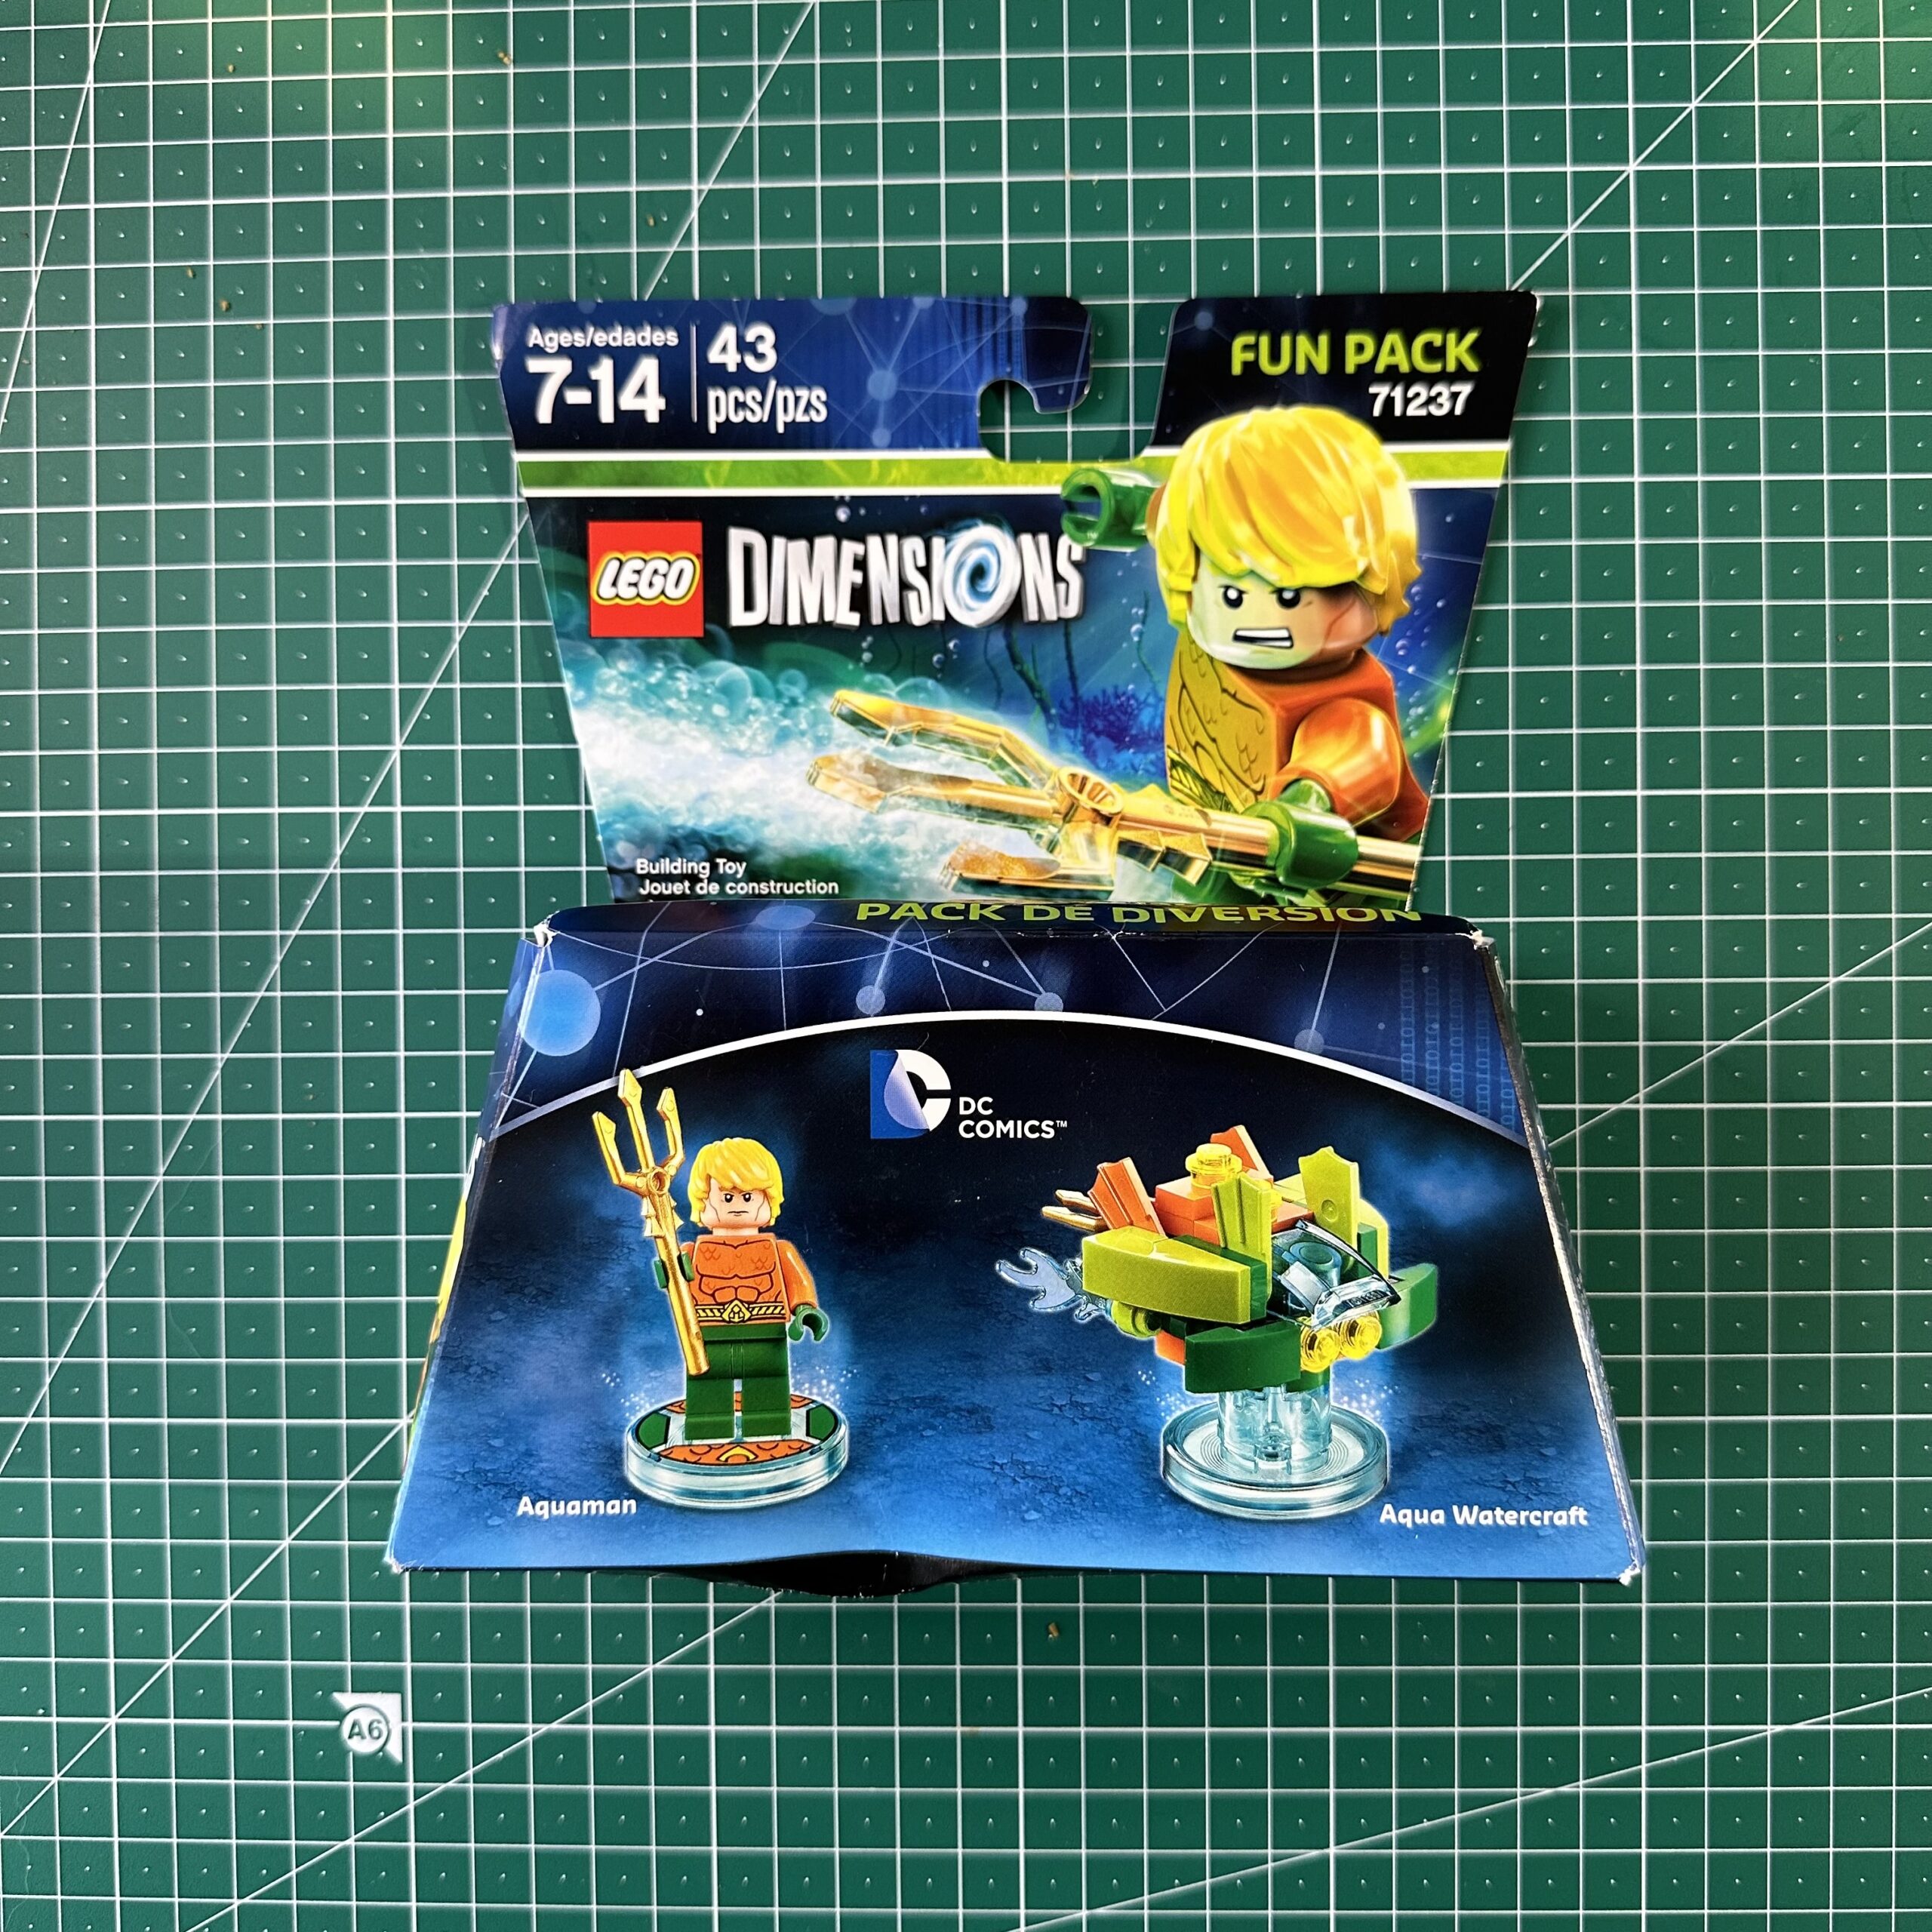 Box for LEGO Dimensions set 71237 Aquaman Fun Pack. Box depicts Aquaman in his signature orange and green outfit plus some random underwater vehicle.